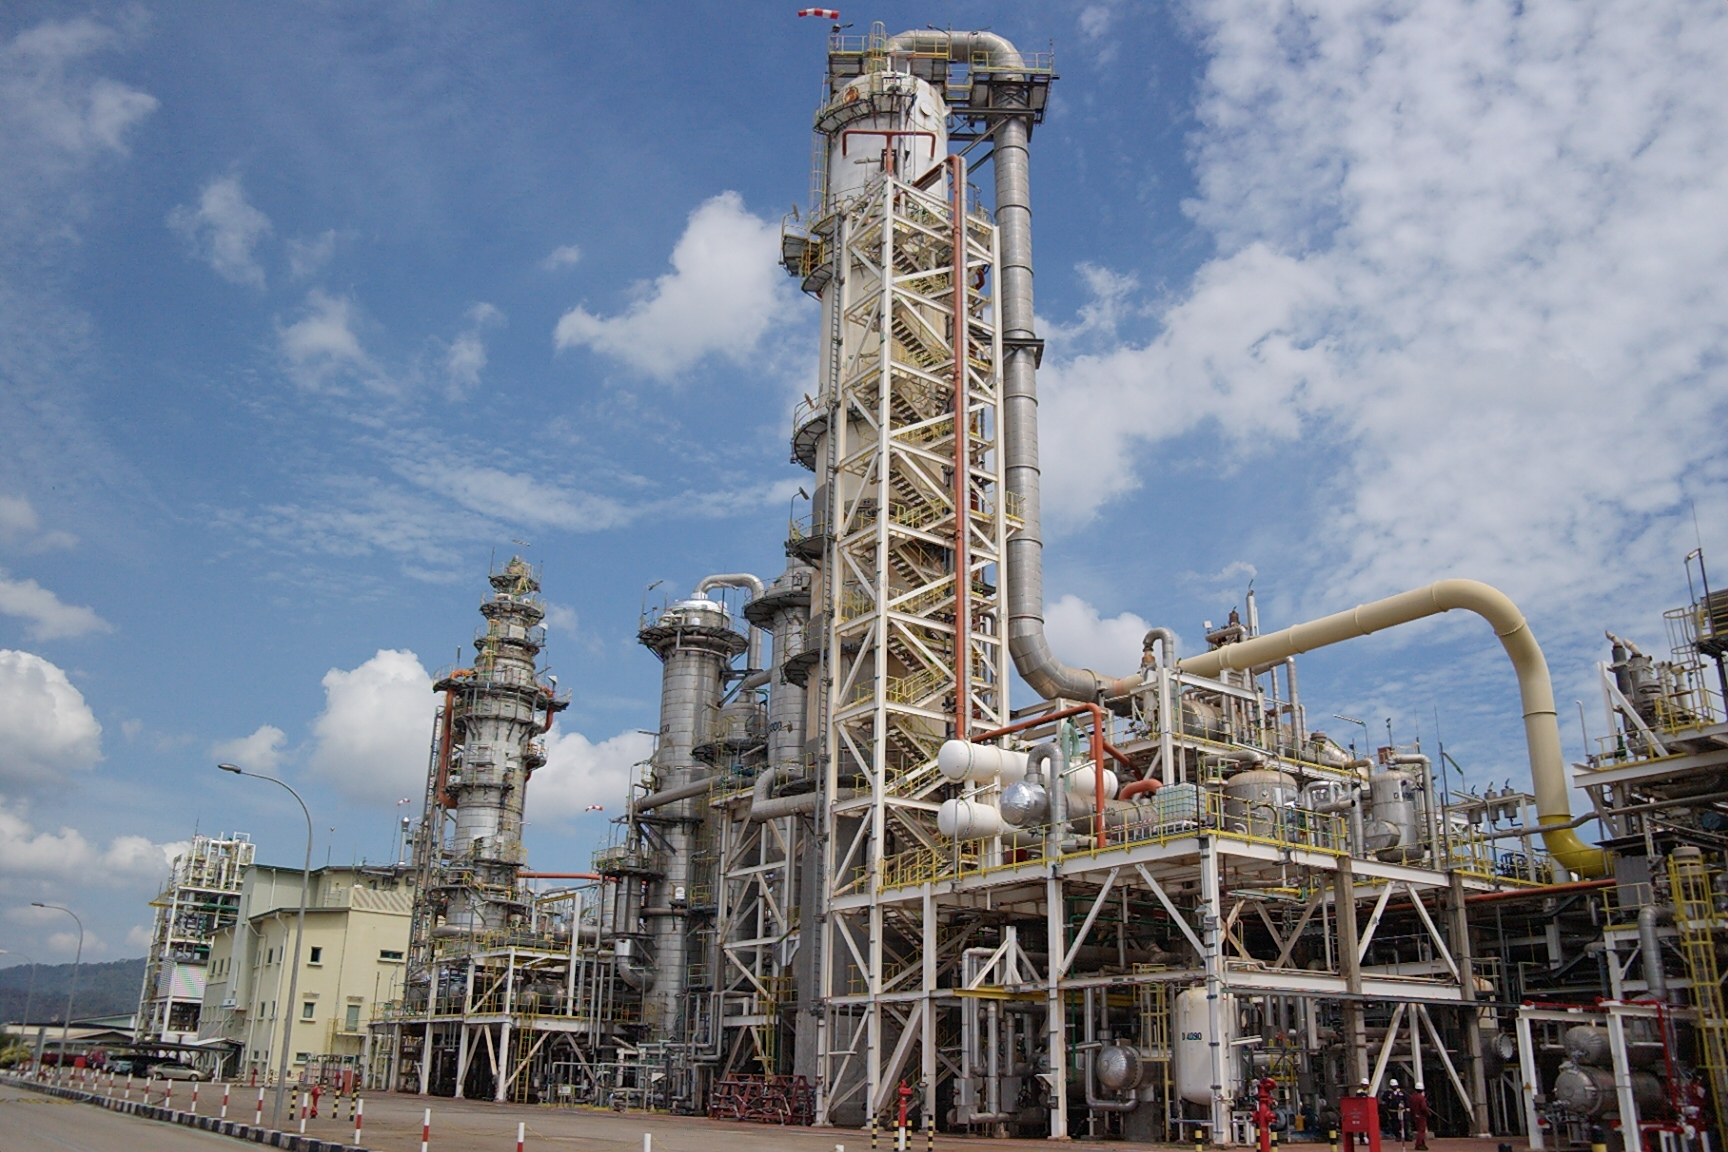 Basf Petronas Chemicals Plans To Expand Production Capacity For Acrylic Acid And Butyl Acrylate In Kuantan Malaysia